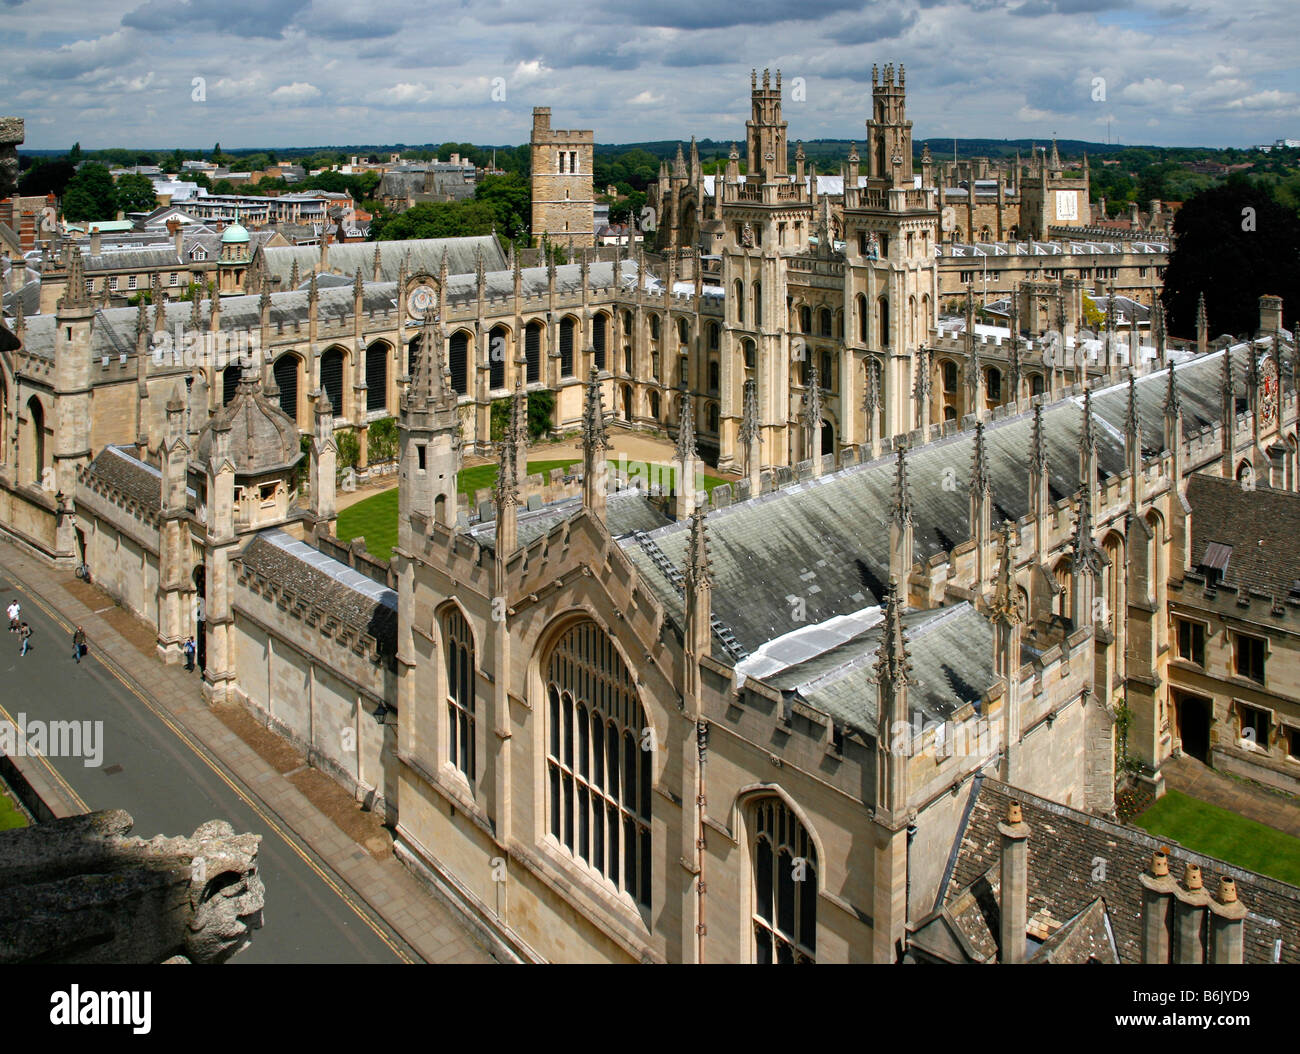 UK, England, Oxford. The All Souls College in Oxford seen from the Tower of St. Mary the Virgin. Stock Photo